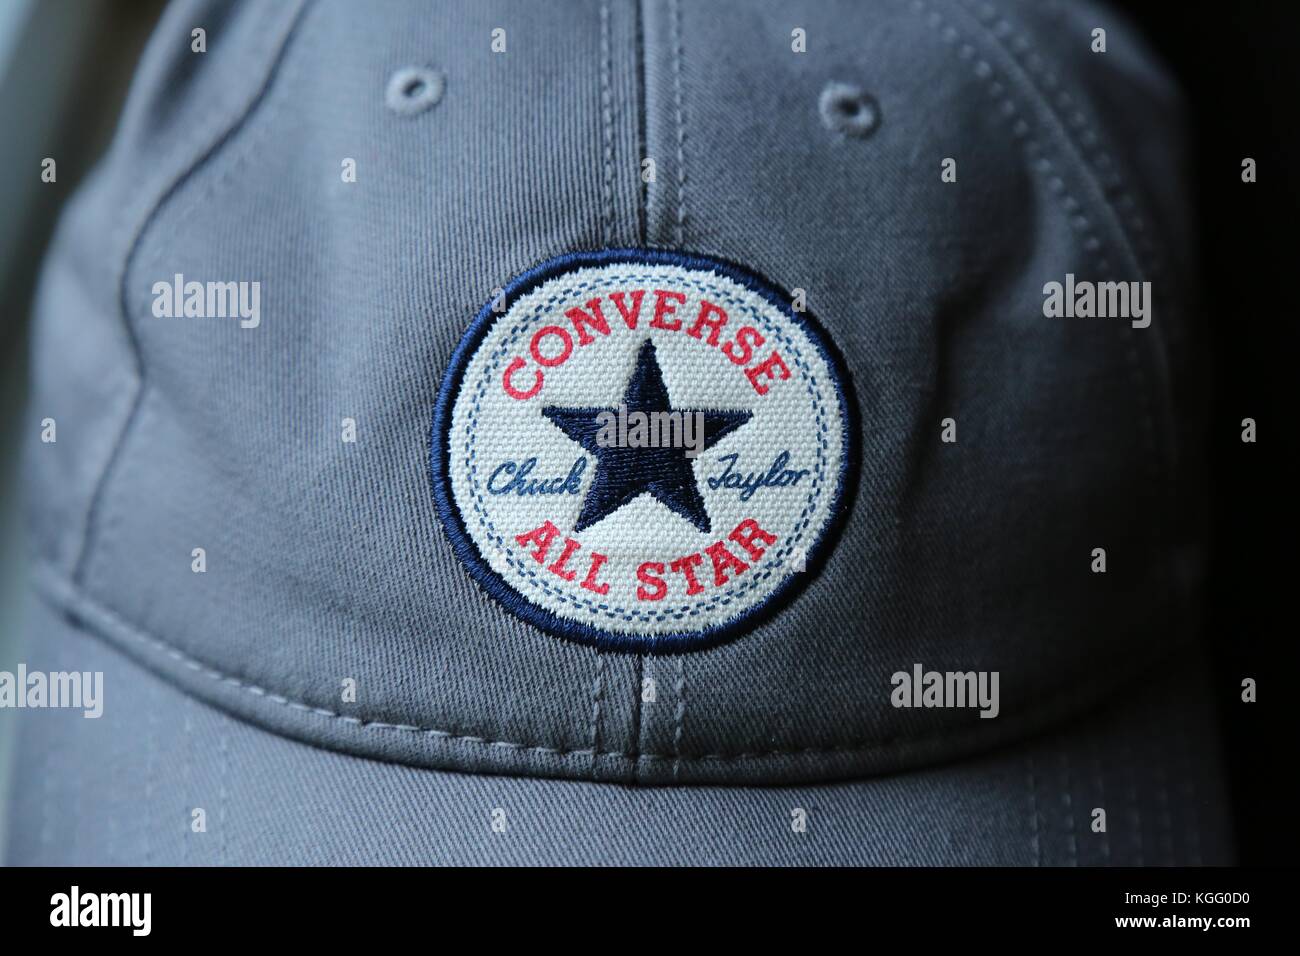 Converse All Star Chuck Taylor Baseball Cap embroided badge on a ...